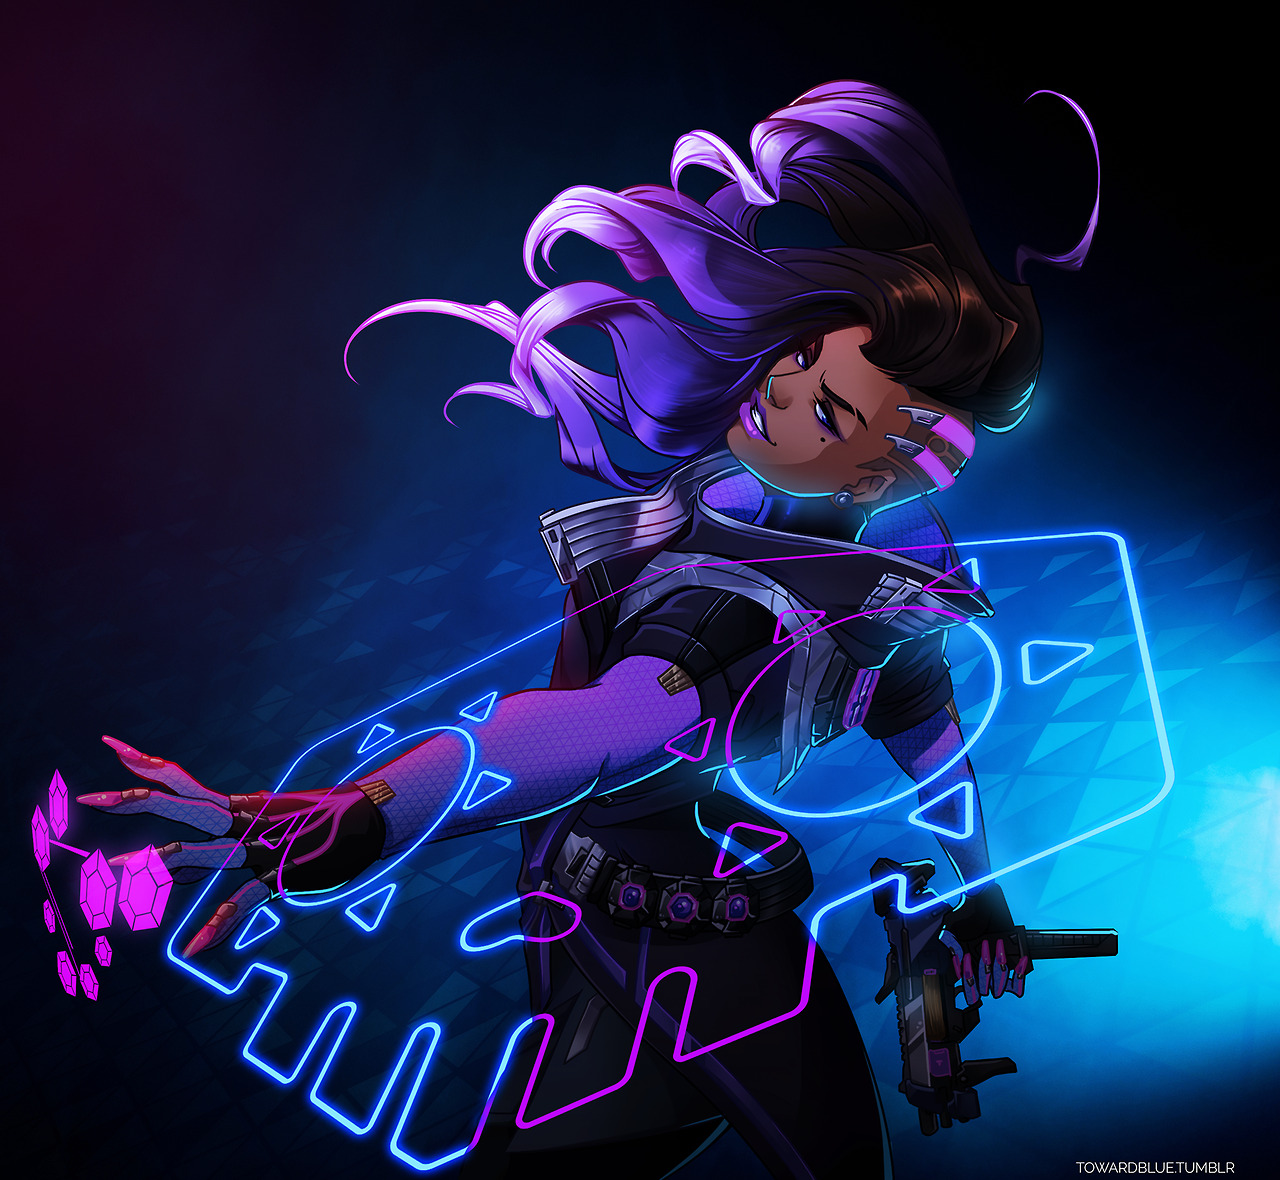 towardblue: Mija Sombra is finally buffed in game to be as viably awesome as she